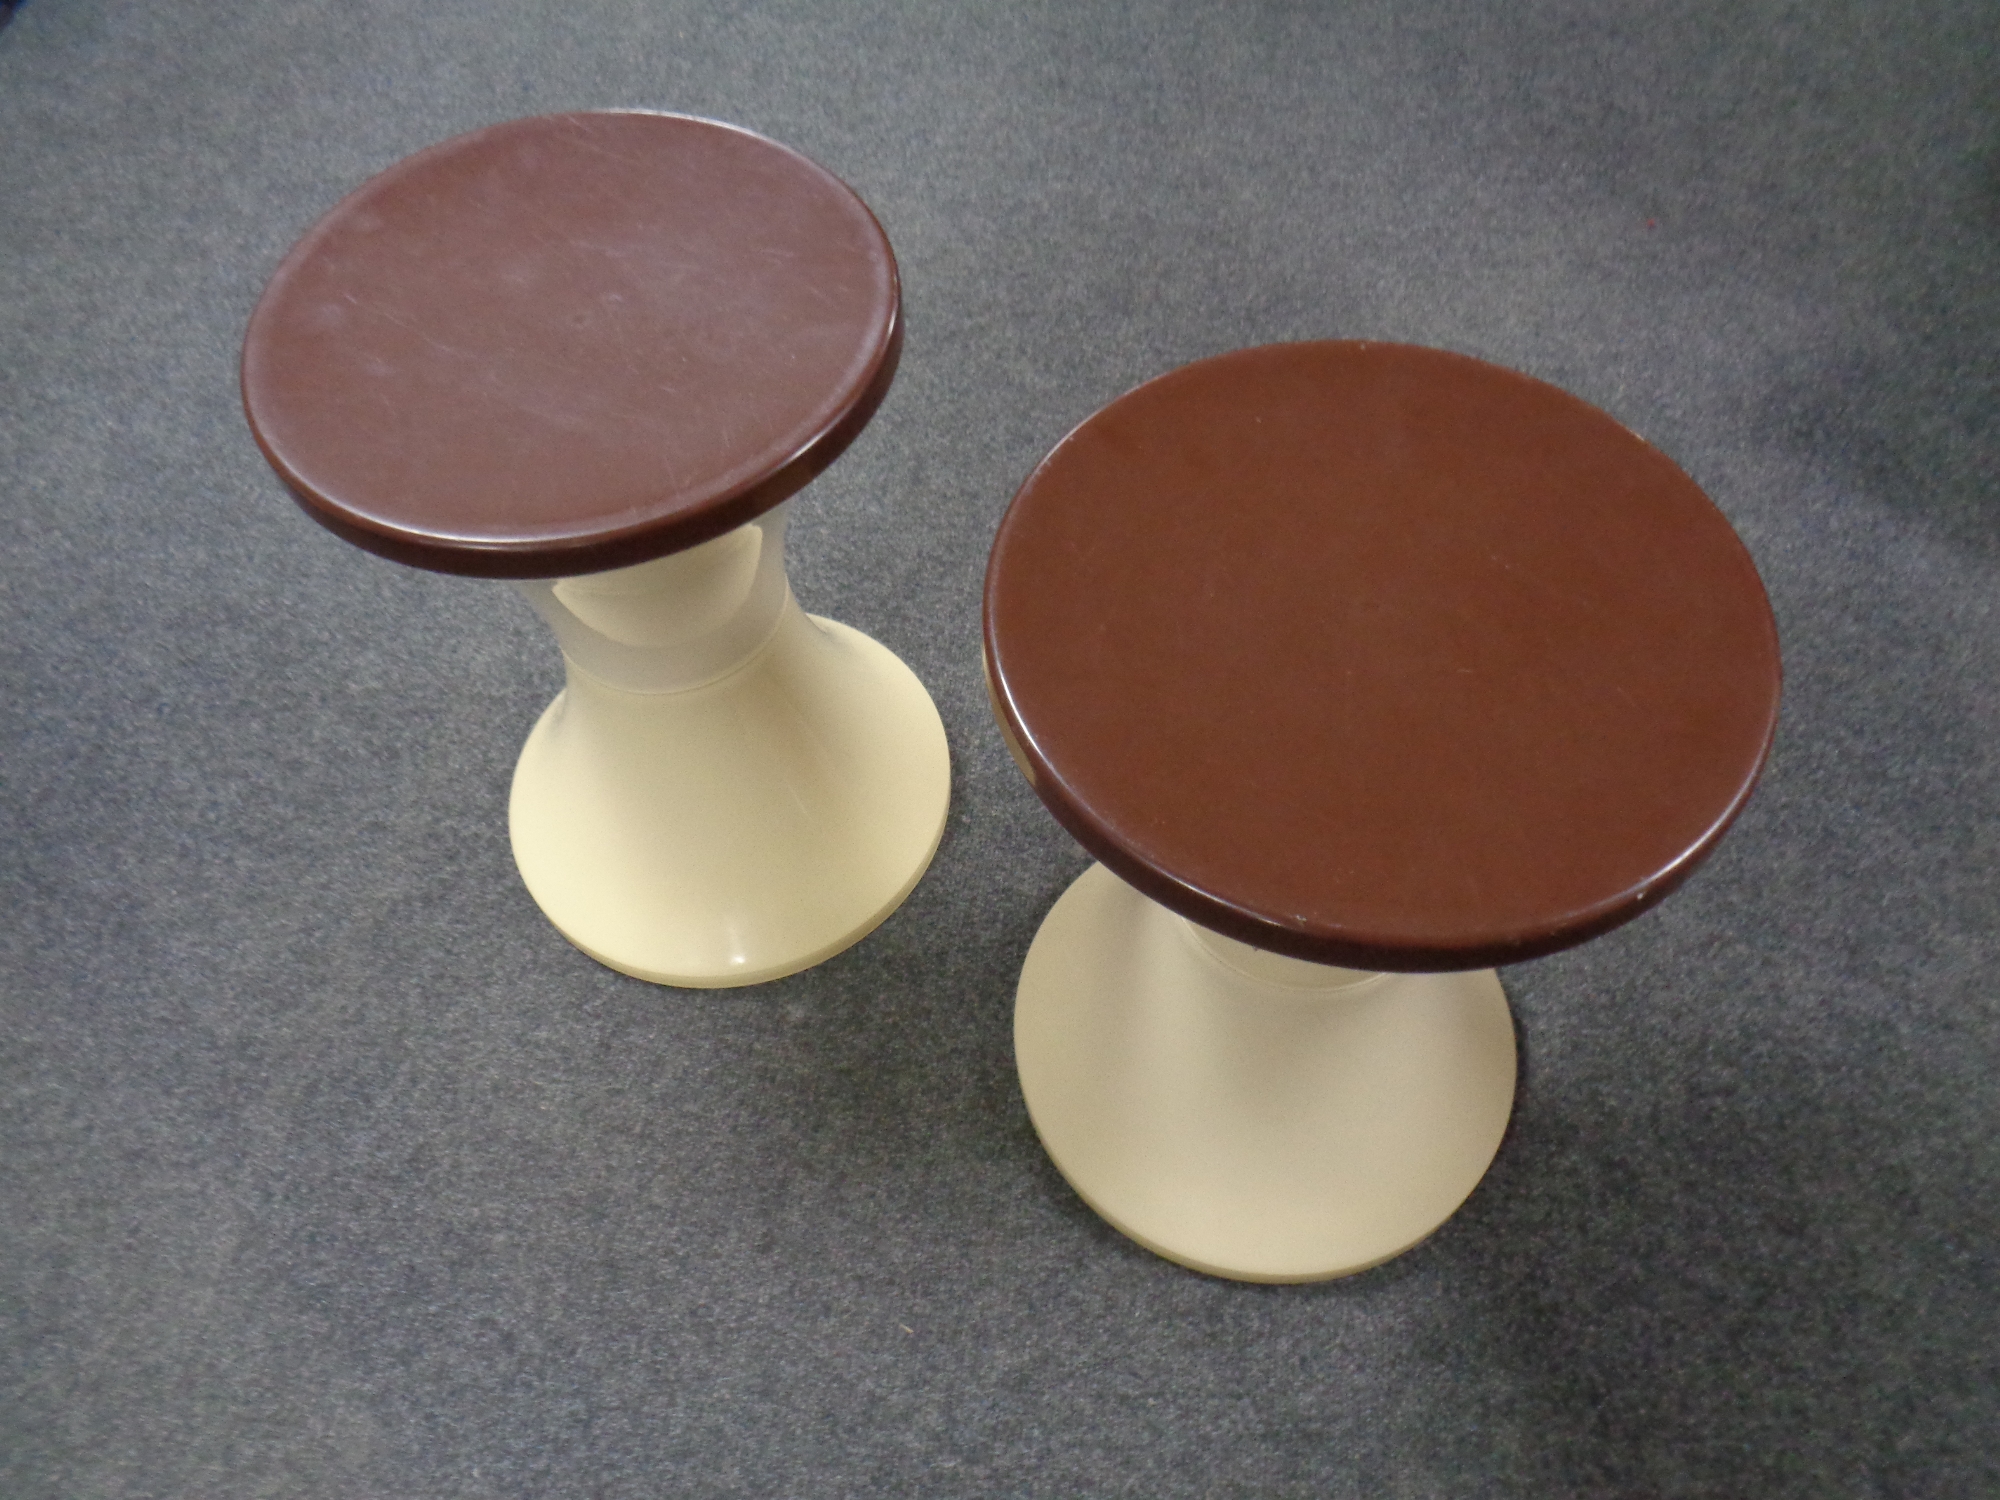 A pair of 1960s plastic stools